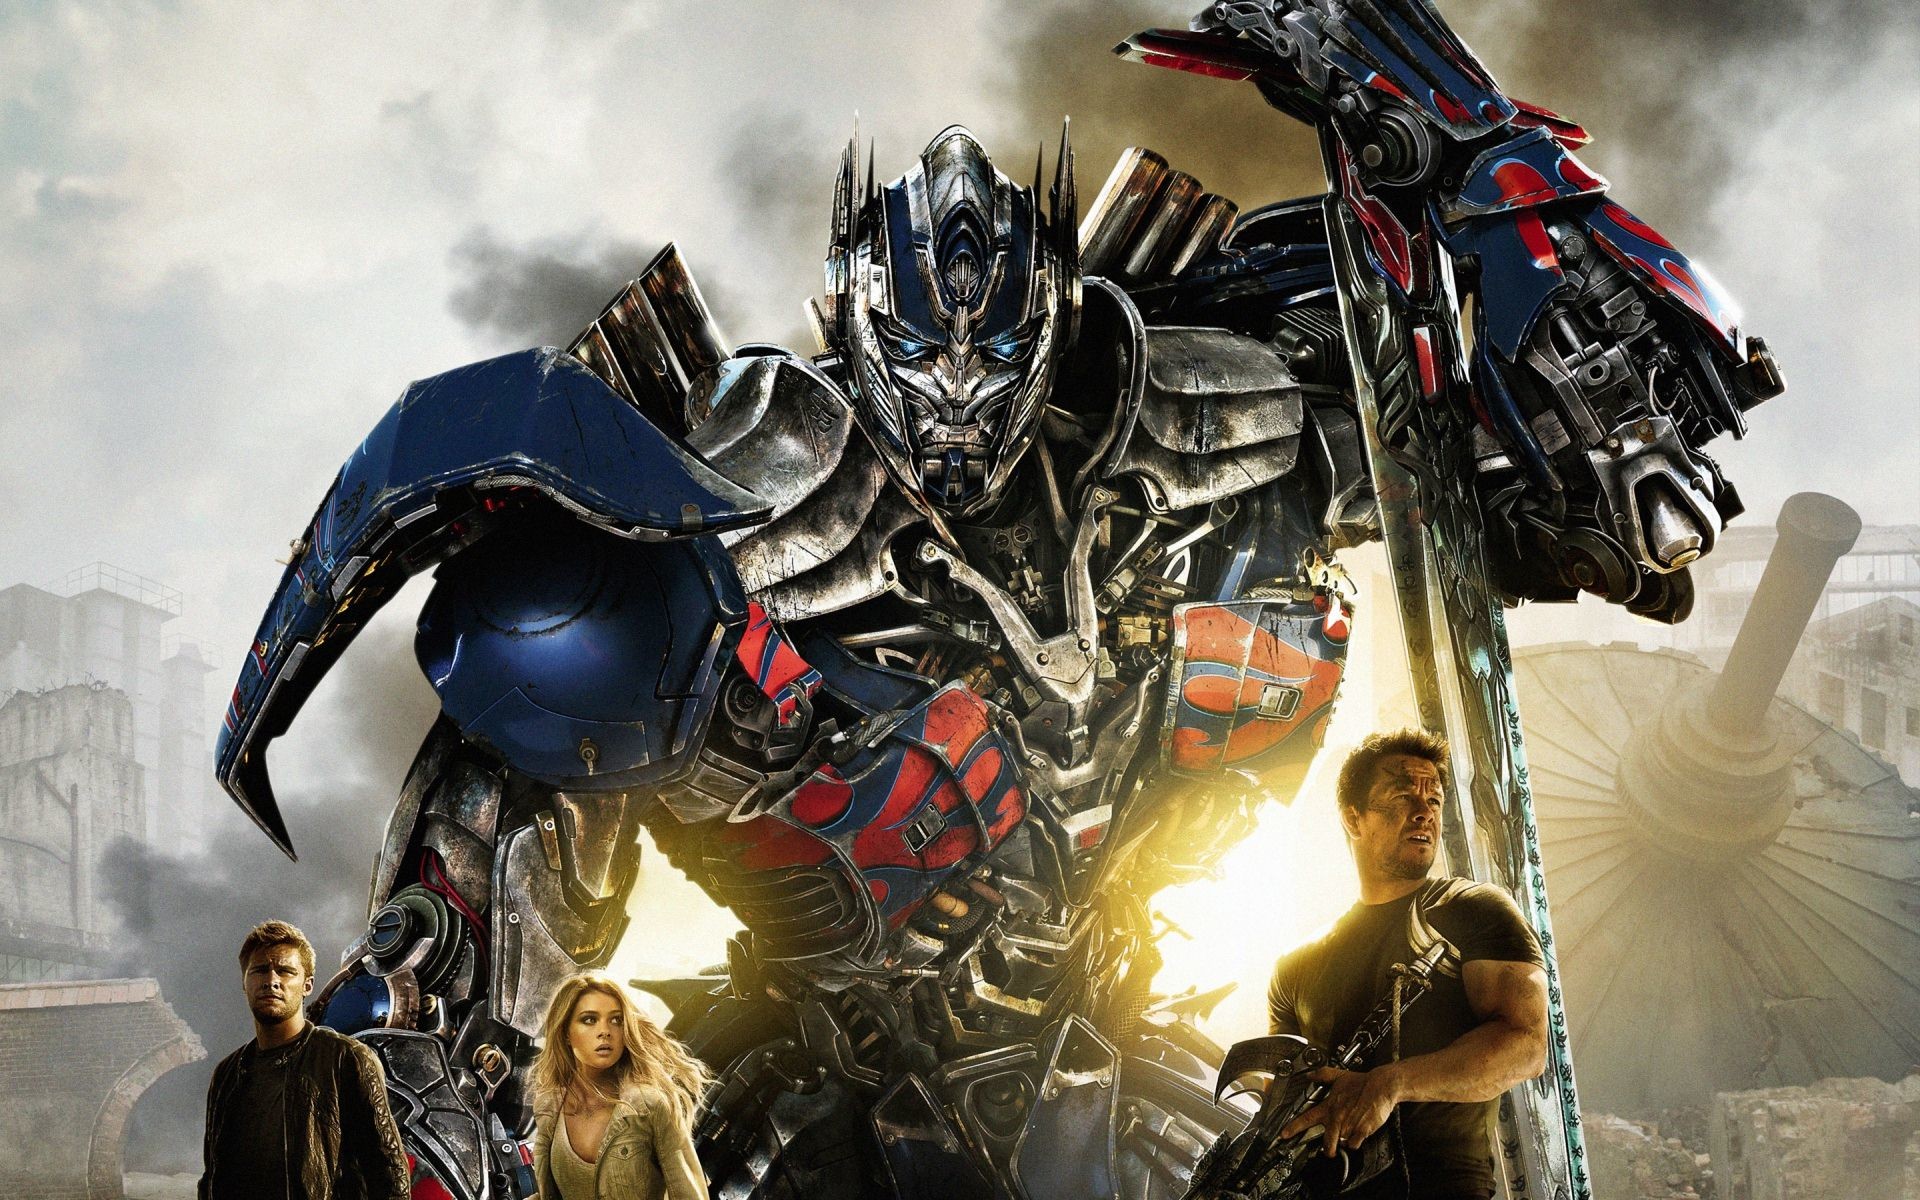 1920x1200 New 2014 Transformers Movie Wallpapers: Transformers Movie Poster Wallpaper  Hd Download px